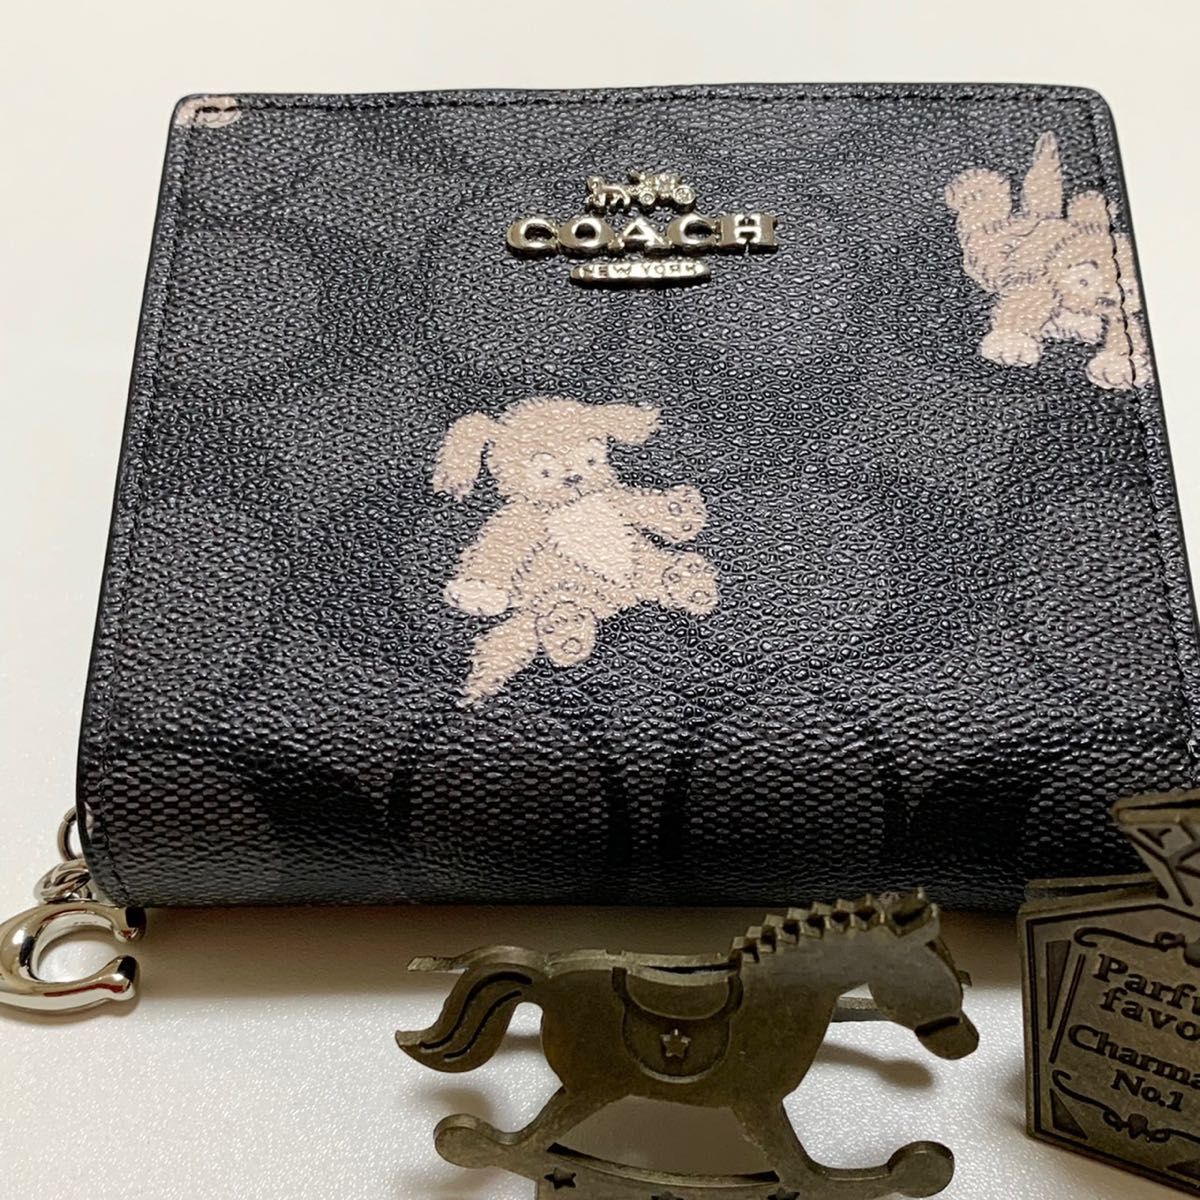 COACH スナップ ウォレット・ハッピー ドッグ CC920COACH Snap Wallet With Happy Dog